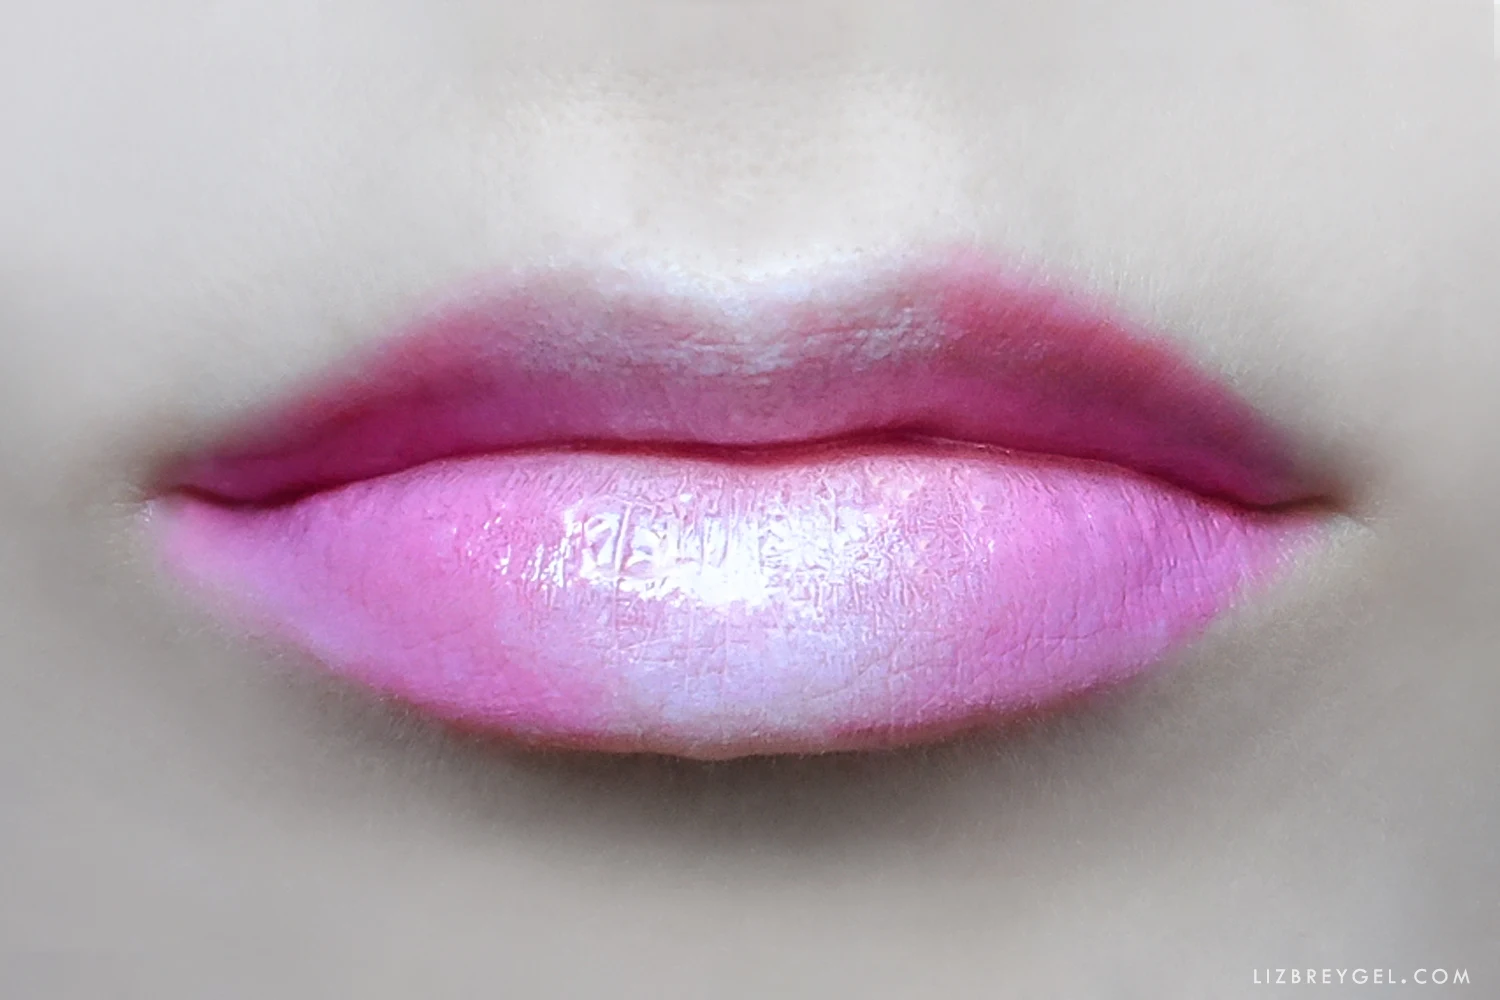 a close-up picture of lips with bright lip makeup